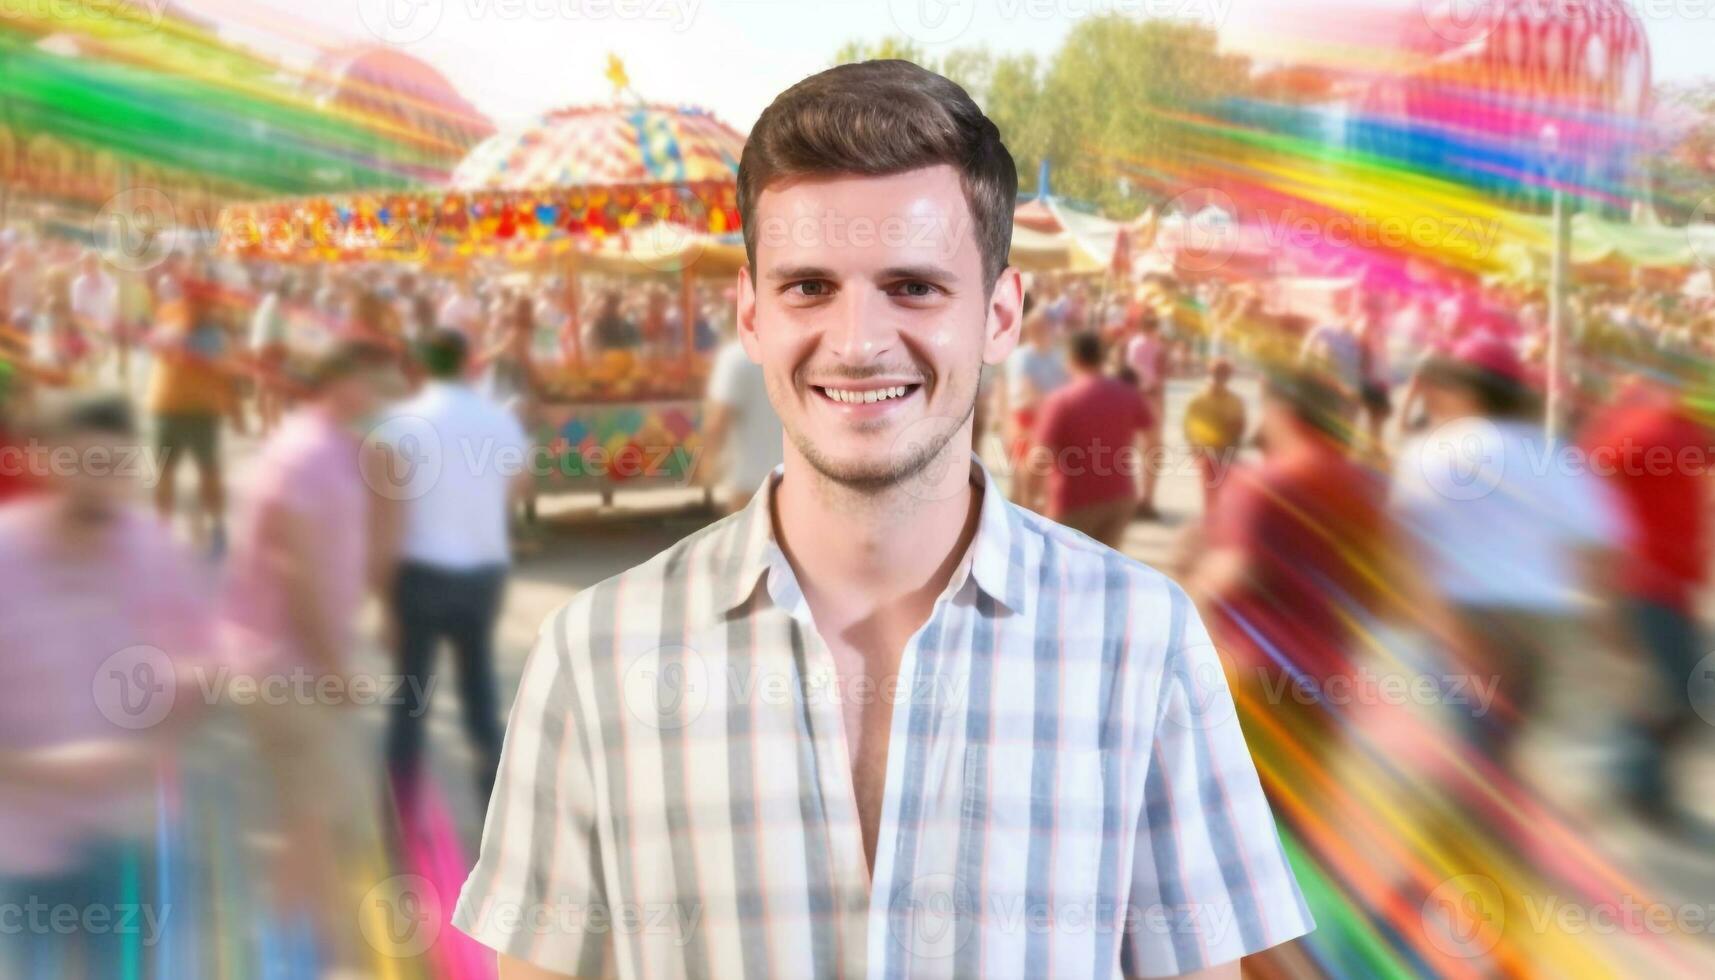 Young adults smiling, enjoying traditional festival with multi colored carnival rides generated by AI photo